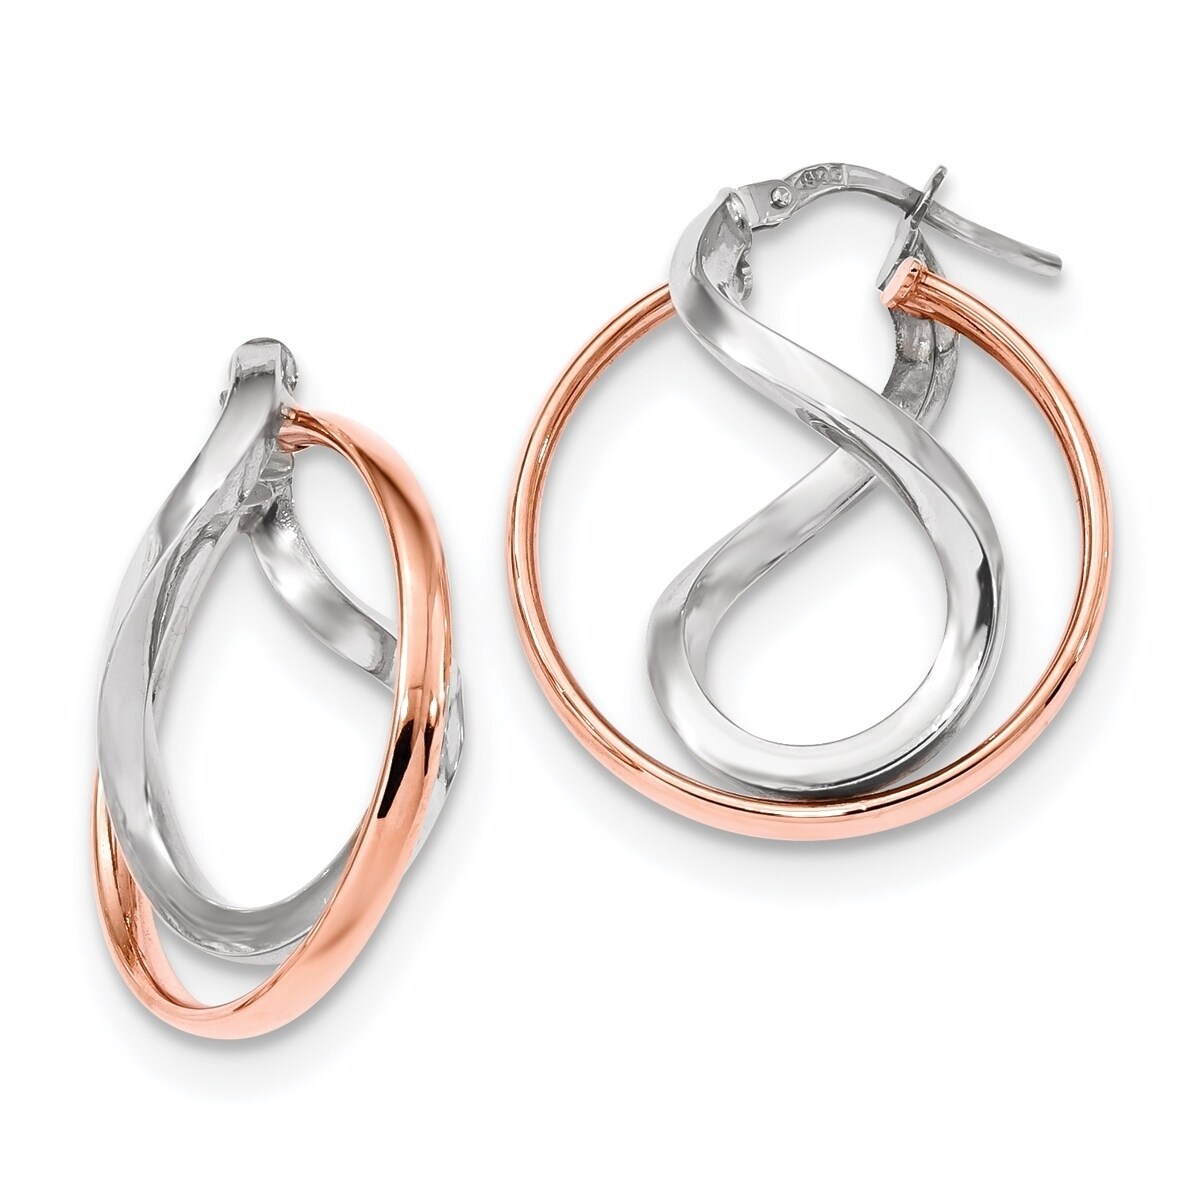 14K White and Rose Gold Polished Fancy Hoop Earrings by Modern ...